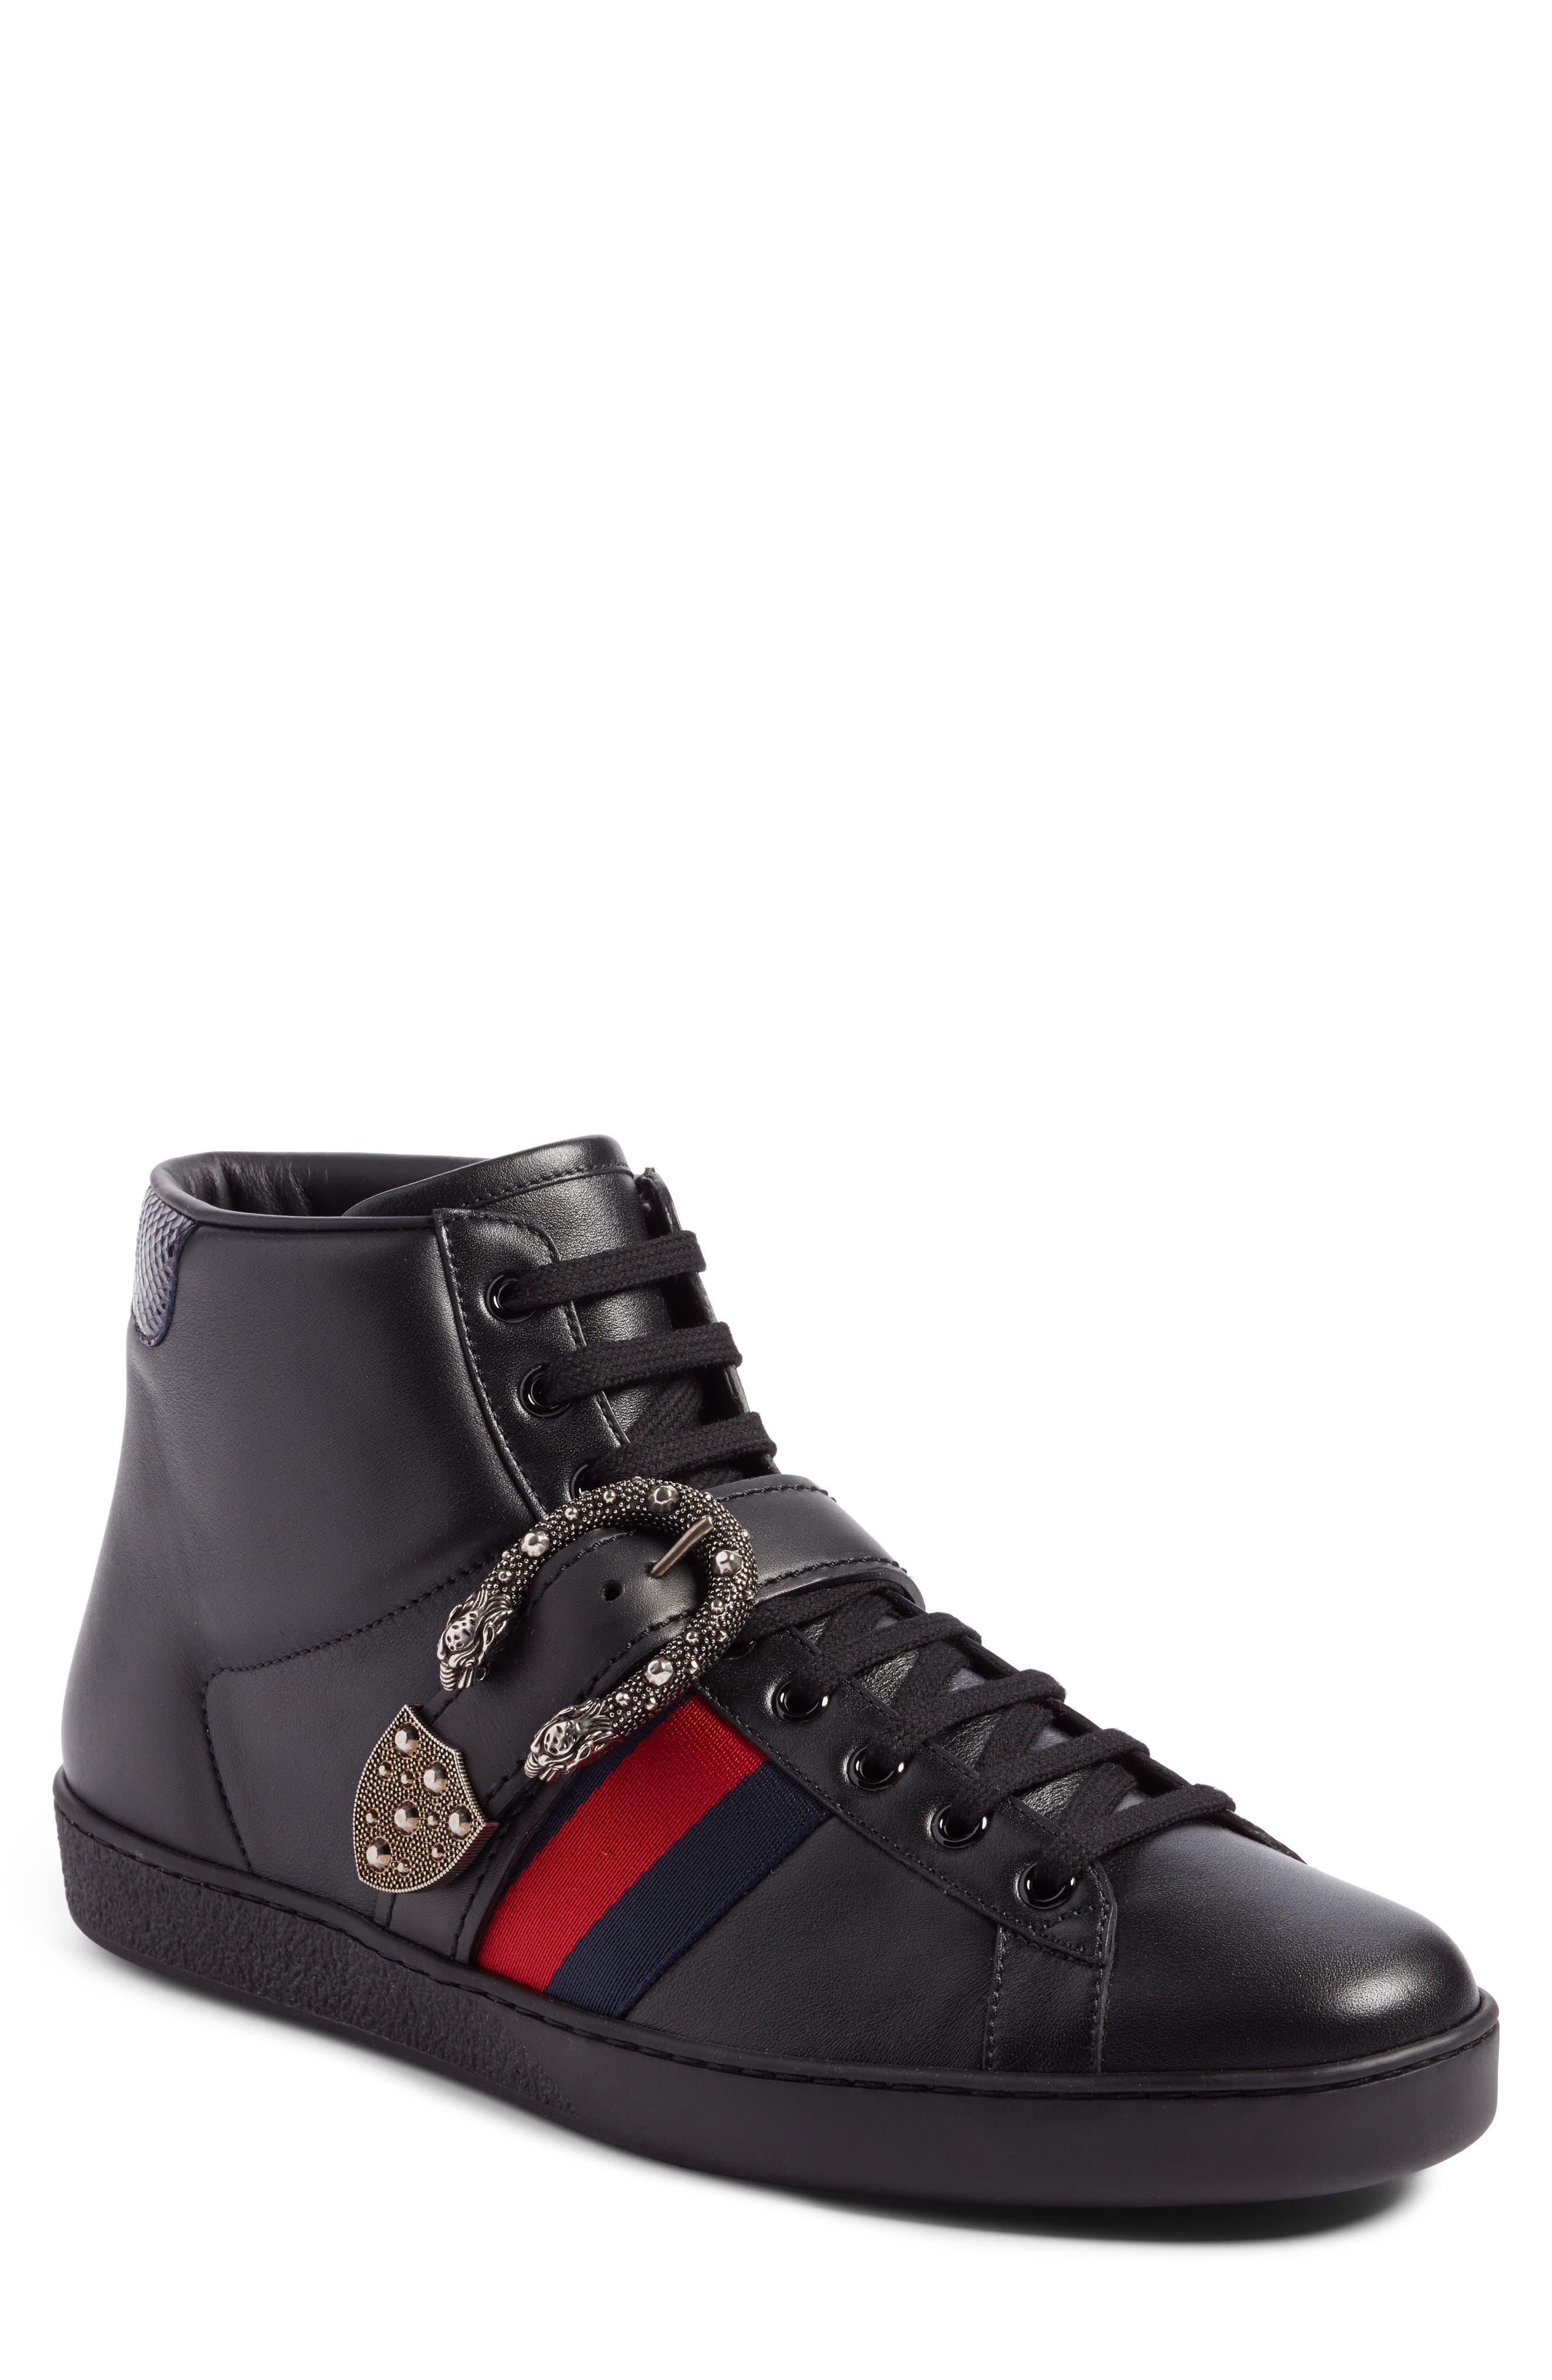 Gucci New Ace Dionysus Buckle High Top 